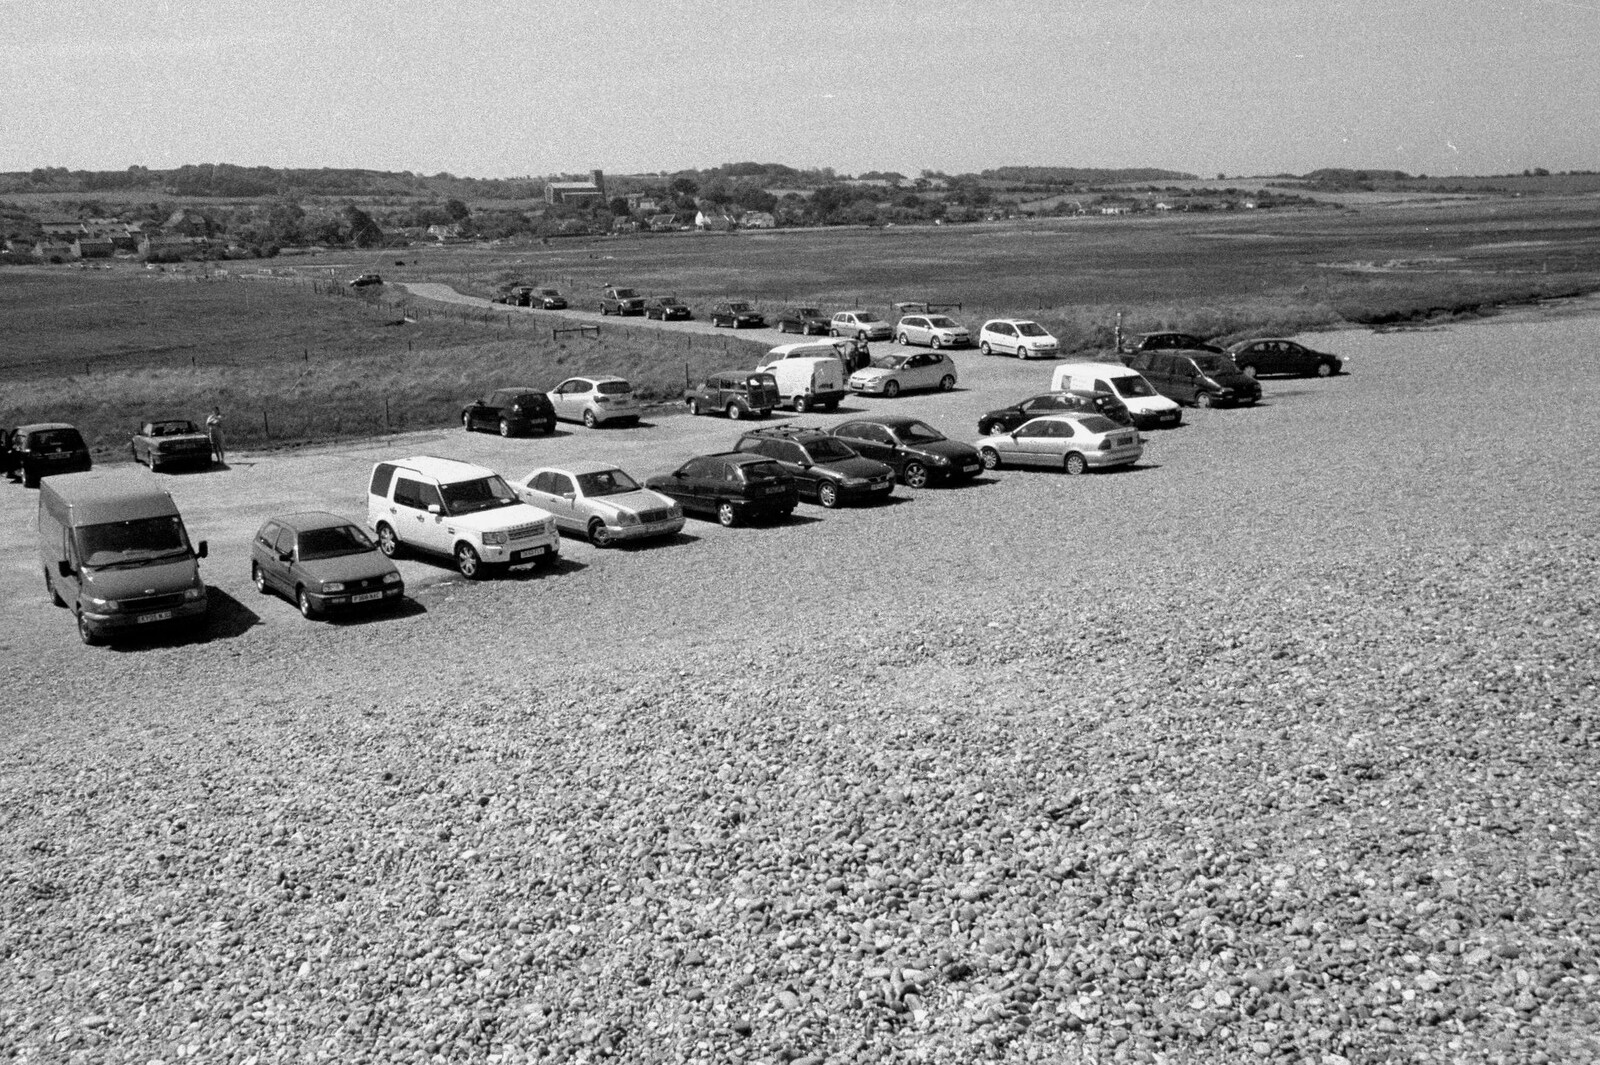 The car park by the beach from The BSCC at Needham, and a Birthday By The Sea, Cley, Norfolk - 26th May 2012